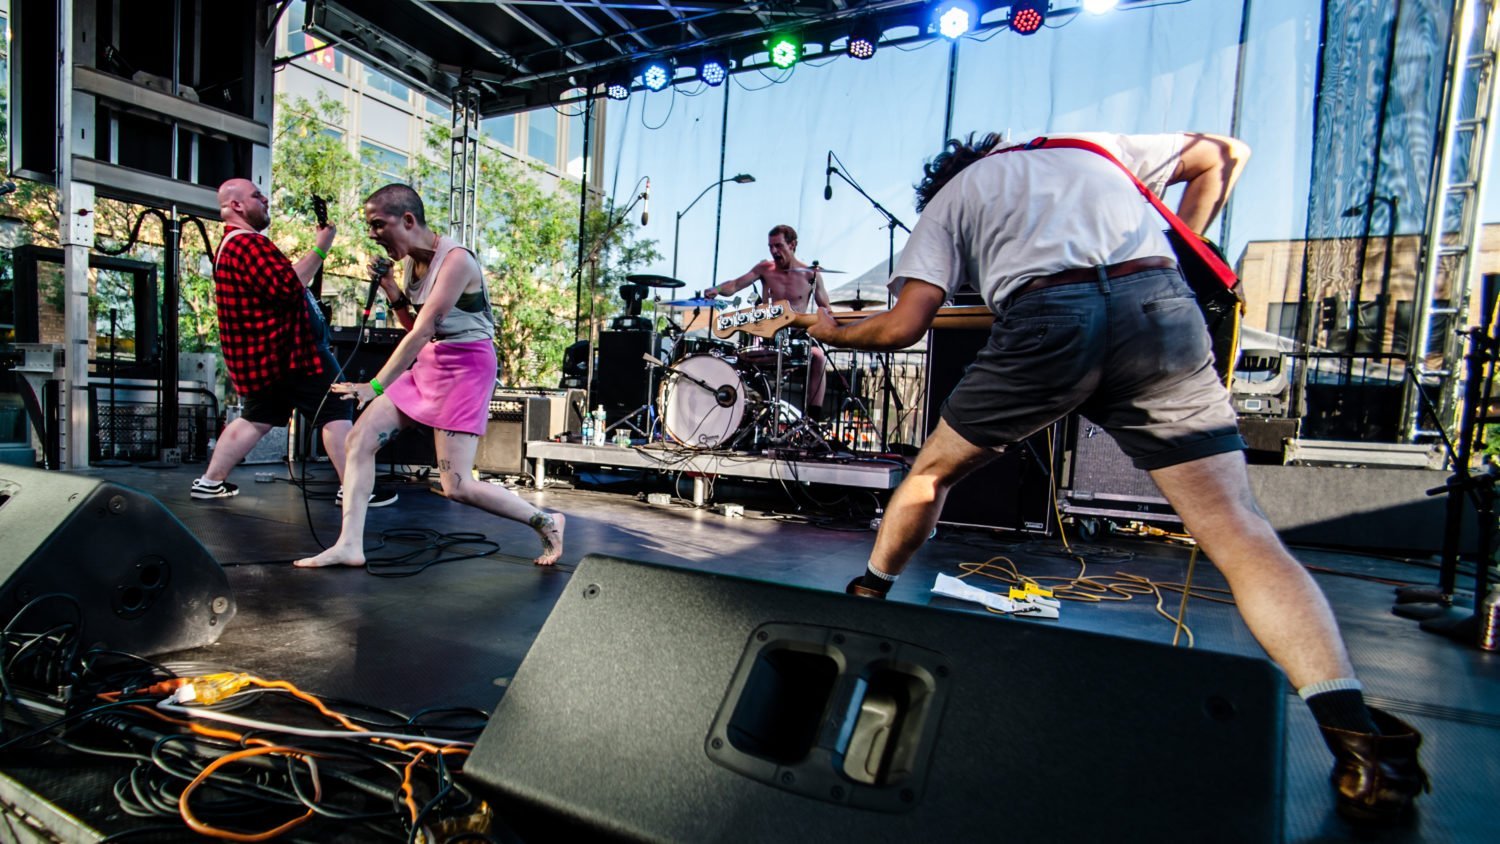 Closet Witch performing at 80/35 Music Festival 2018 in Des Moines, Iowa